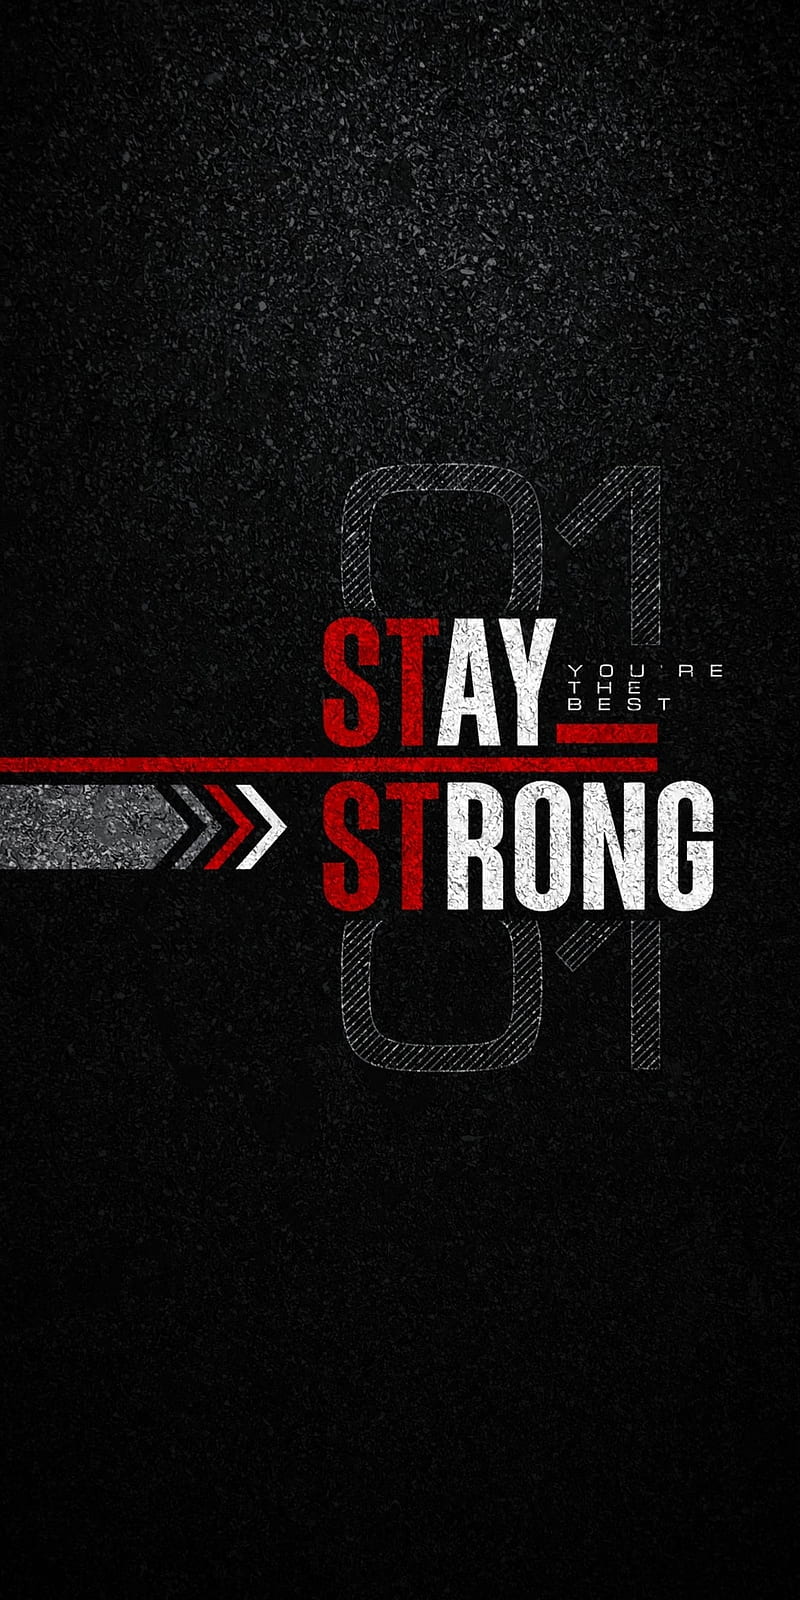 Stay strong black life quotes sad strong HD phone wallpaper  Peakpx